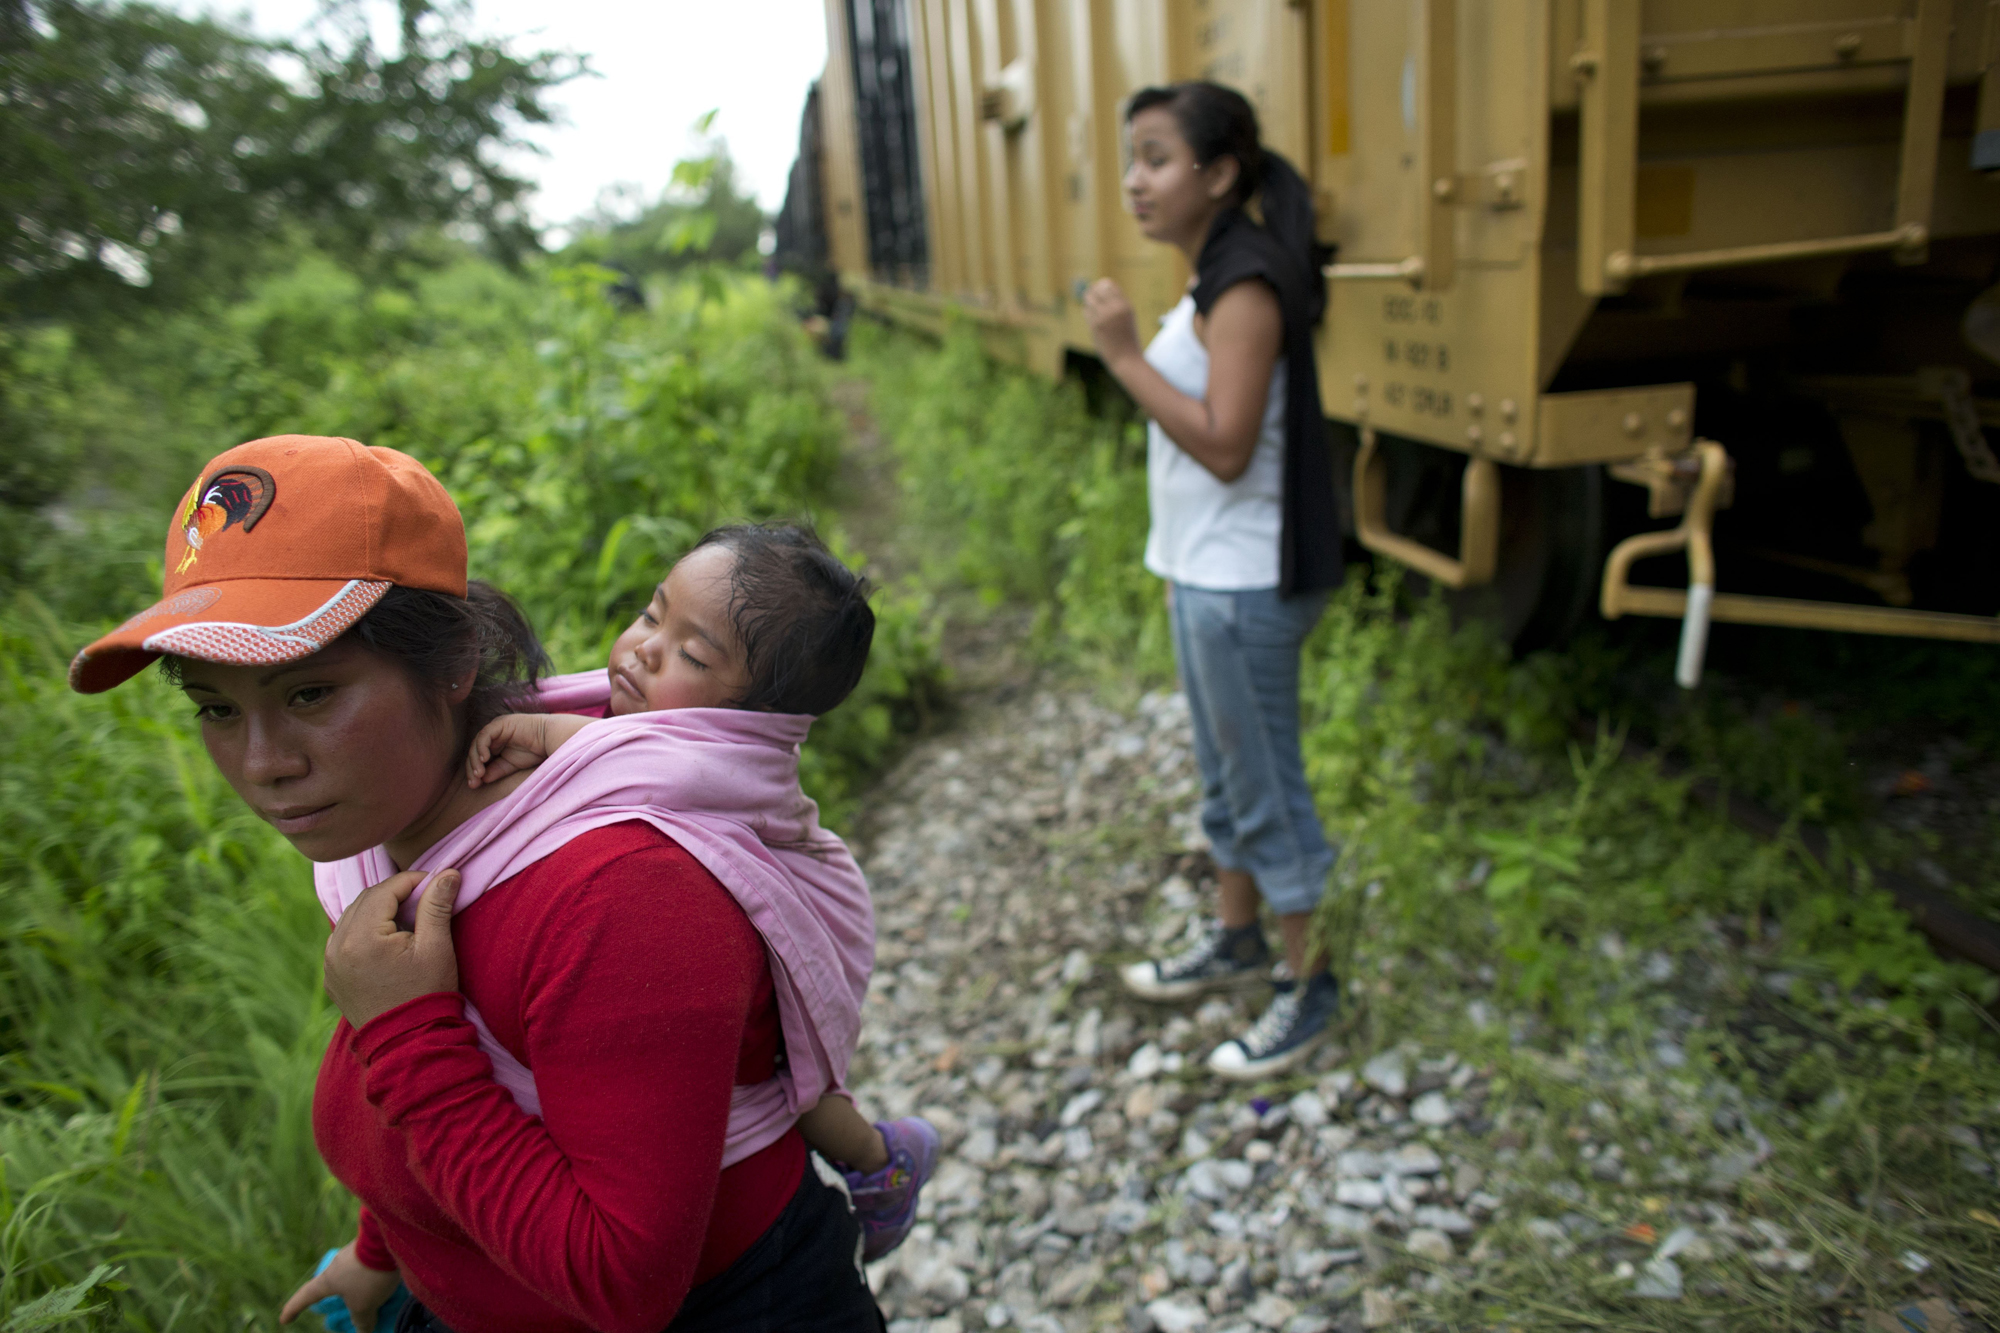 Guatemalan migrant Gladys Chinoy, 14, right, waits with more than 500 other migrants, many traveling with small children, beside the stuck freight train on which they were traveling, outside Reforma de Pineda, Chiapas state, Mexico, June 20.